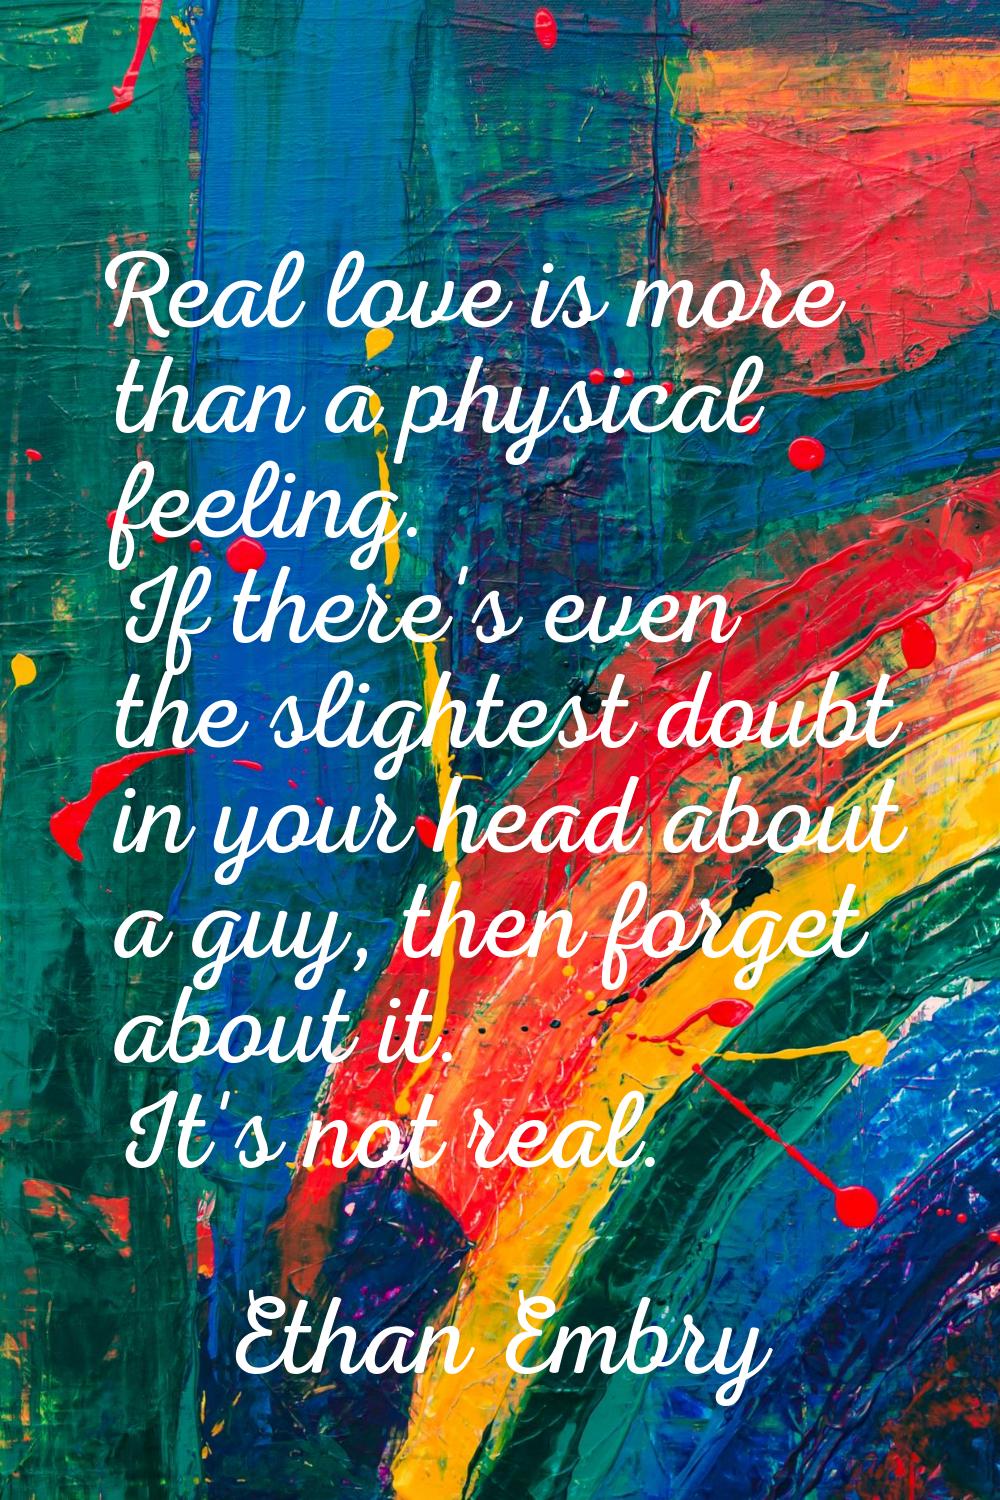 Real love is more than a physical feeling. If there's even the slightest doubt in your head about a